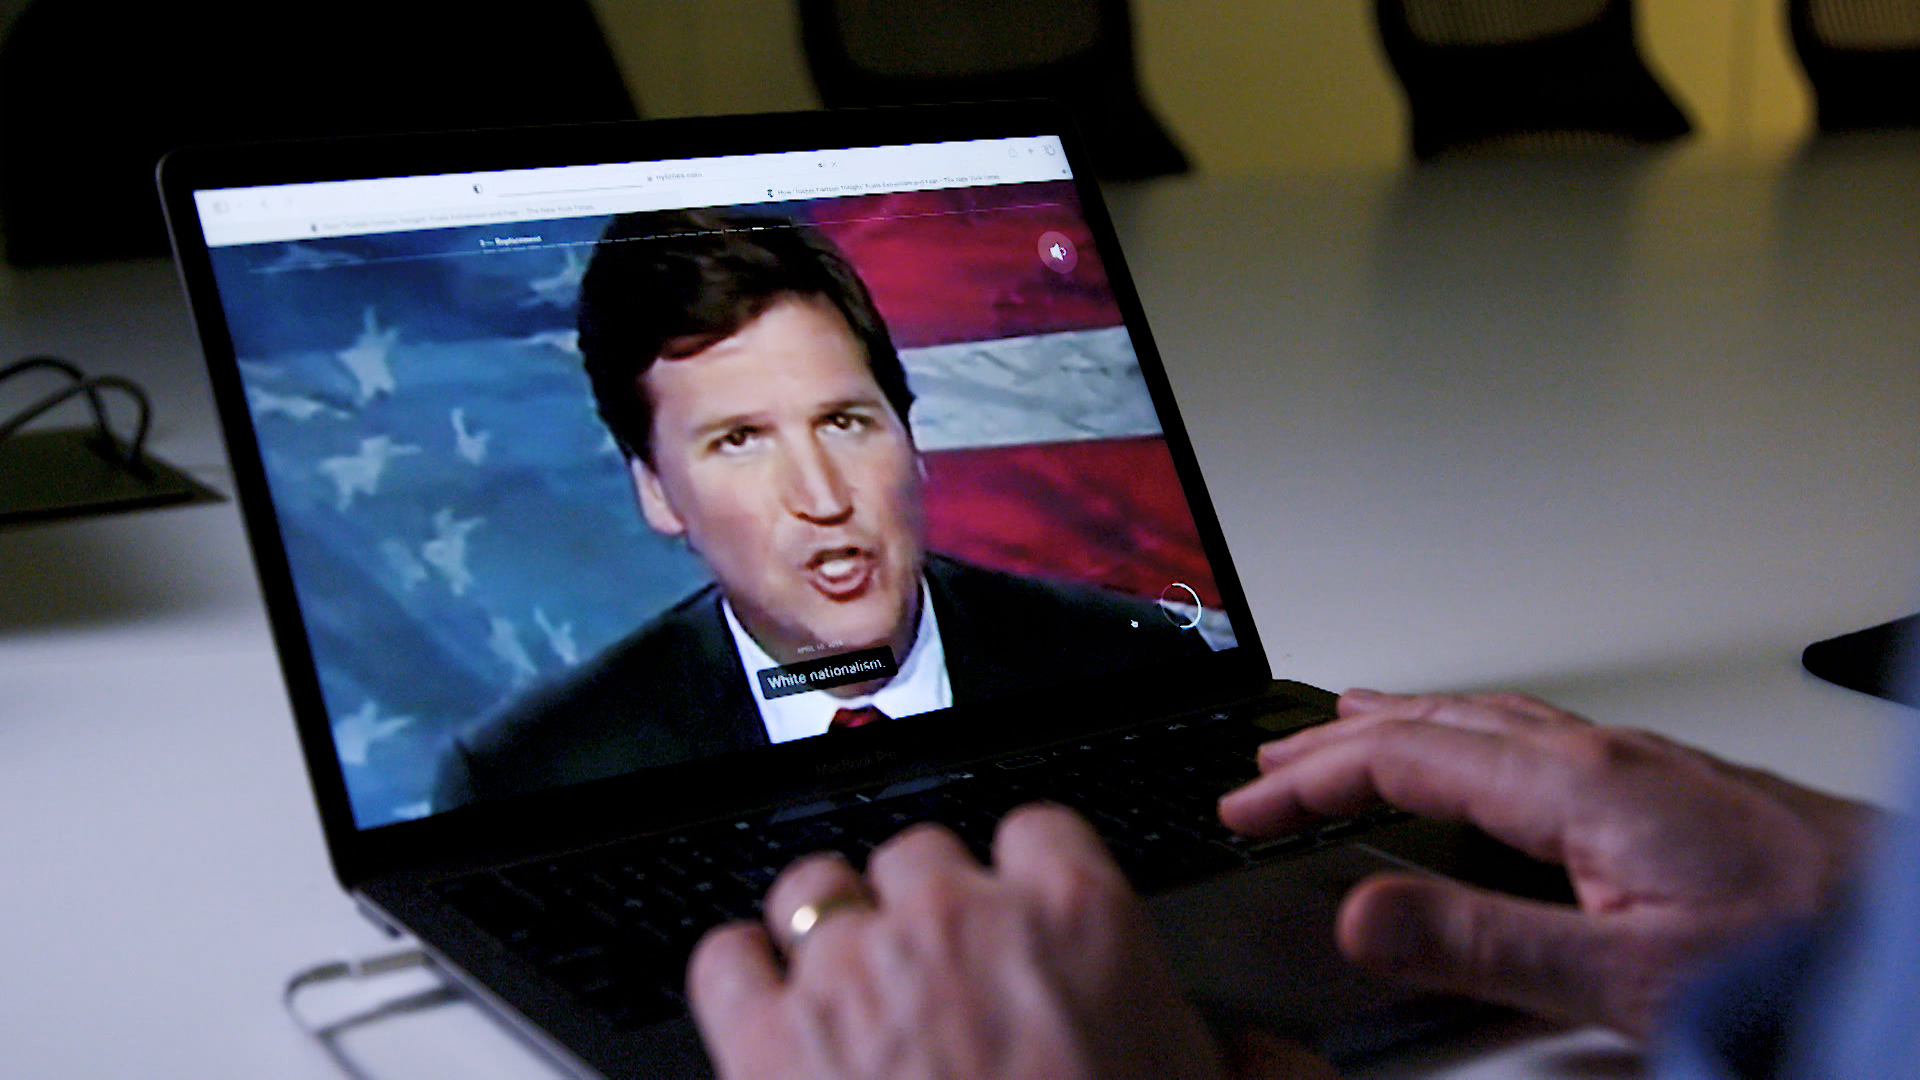 Someone is watching Tucker Carlson's program on a laptop.